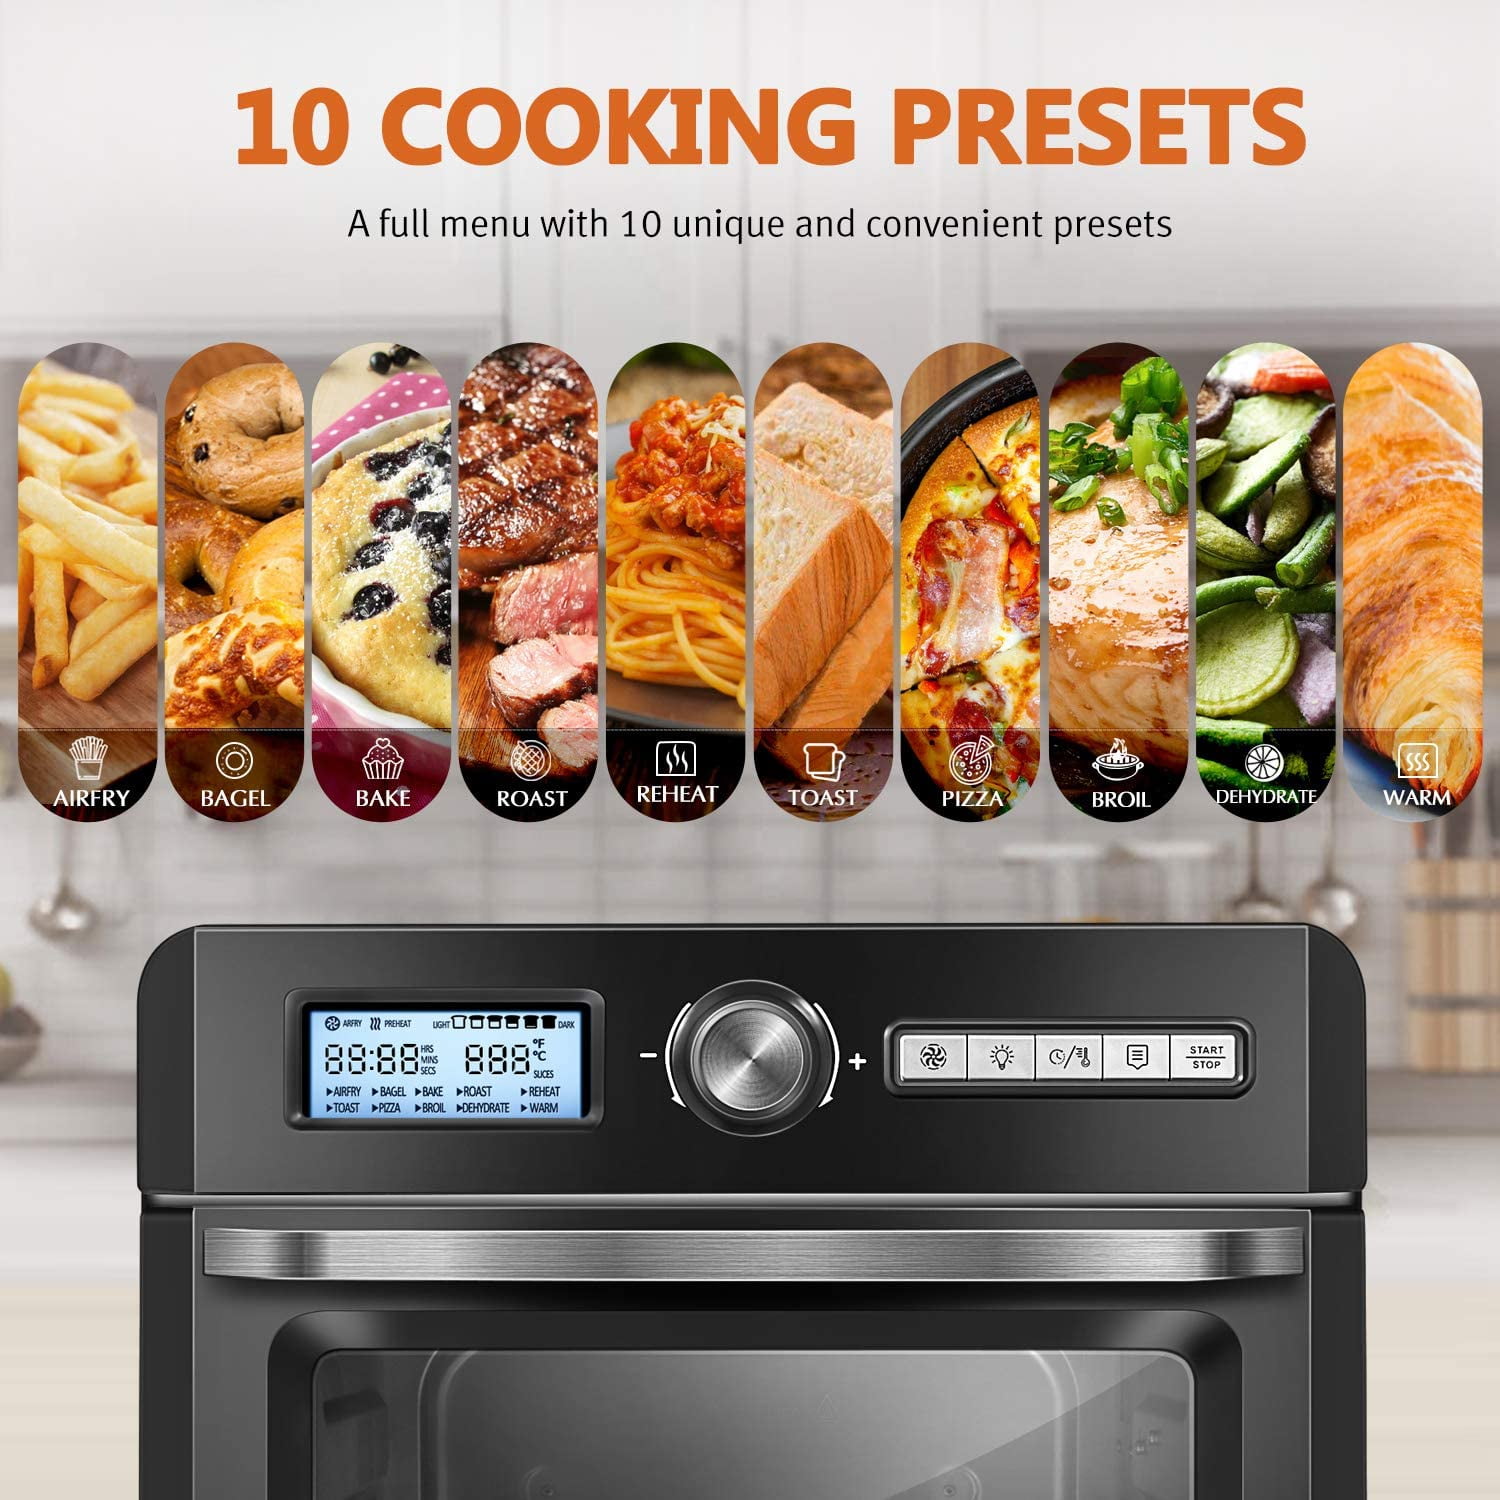 Original Recipe and 8 Accessories Included Convection Roaster with Rotisserie & Dehydrator 10-in-1 Countertop Oven UL Listed CROWNFUL 19 Quart Air Fryer Toaster Oven Black